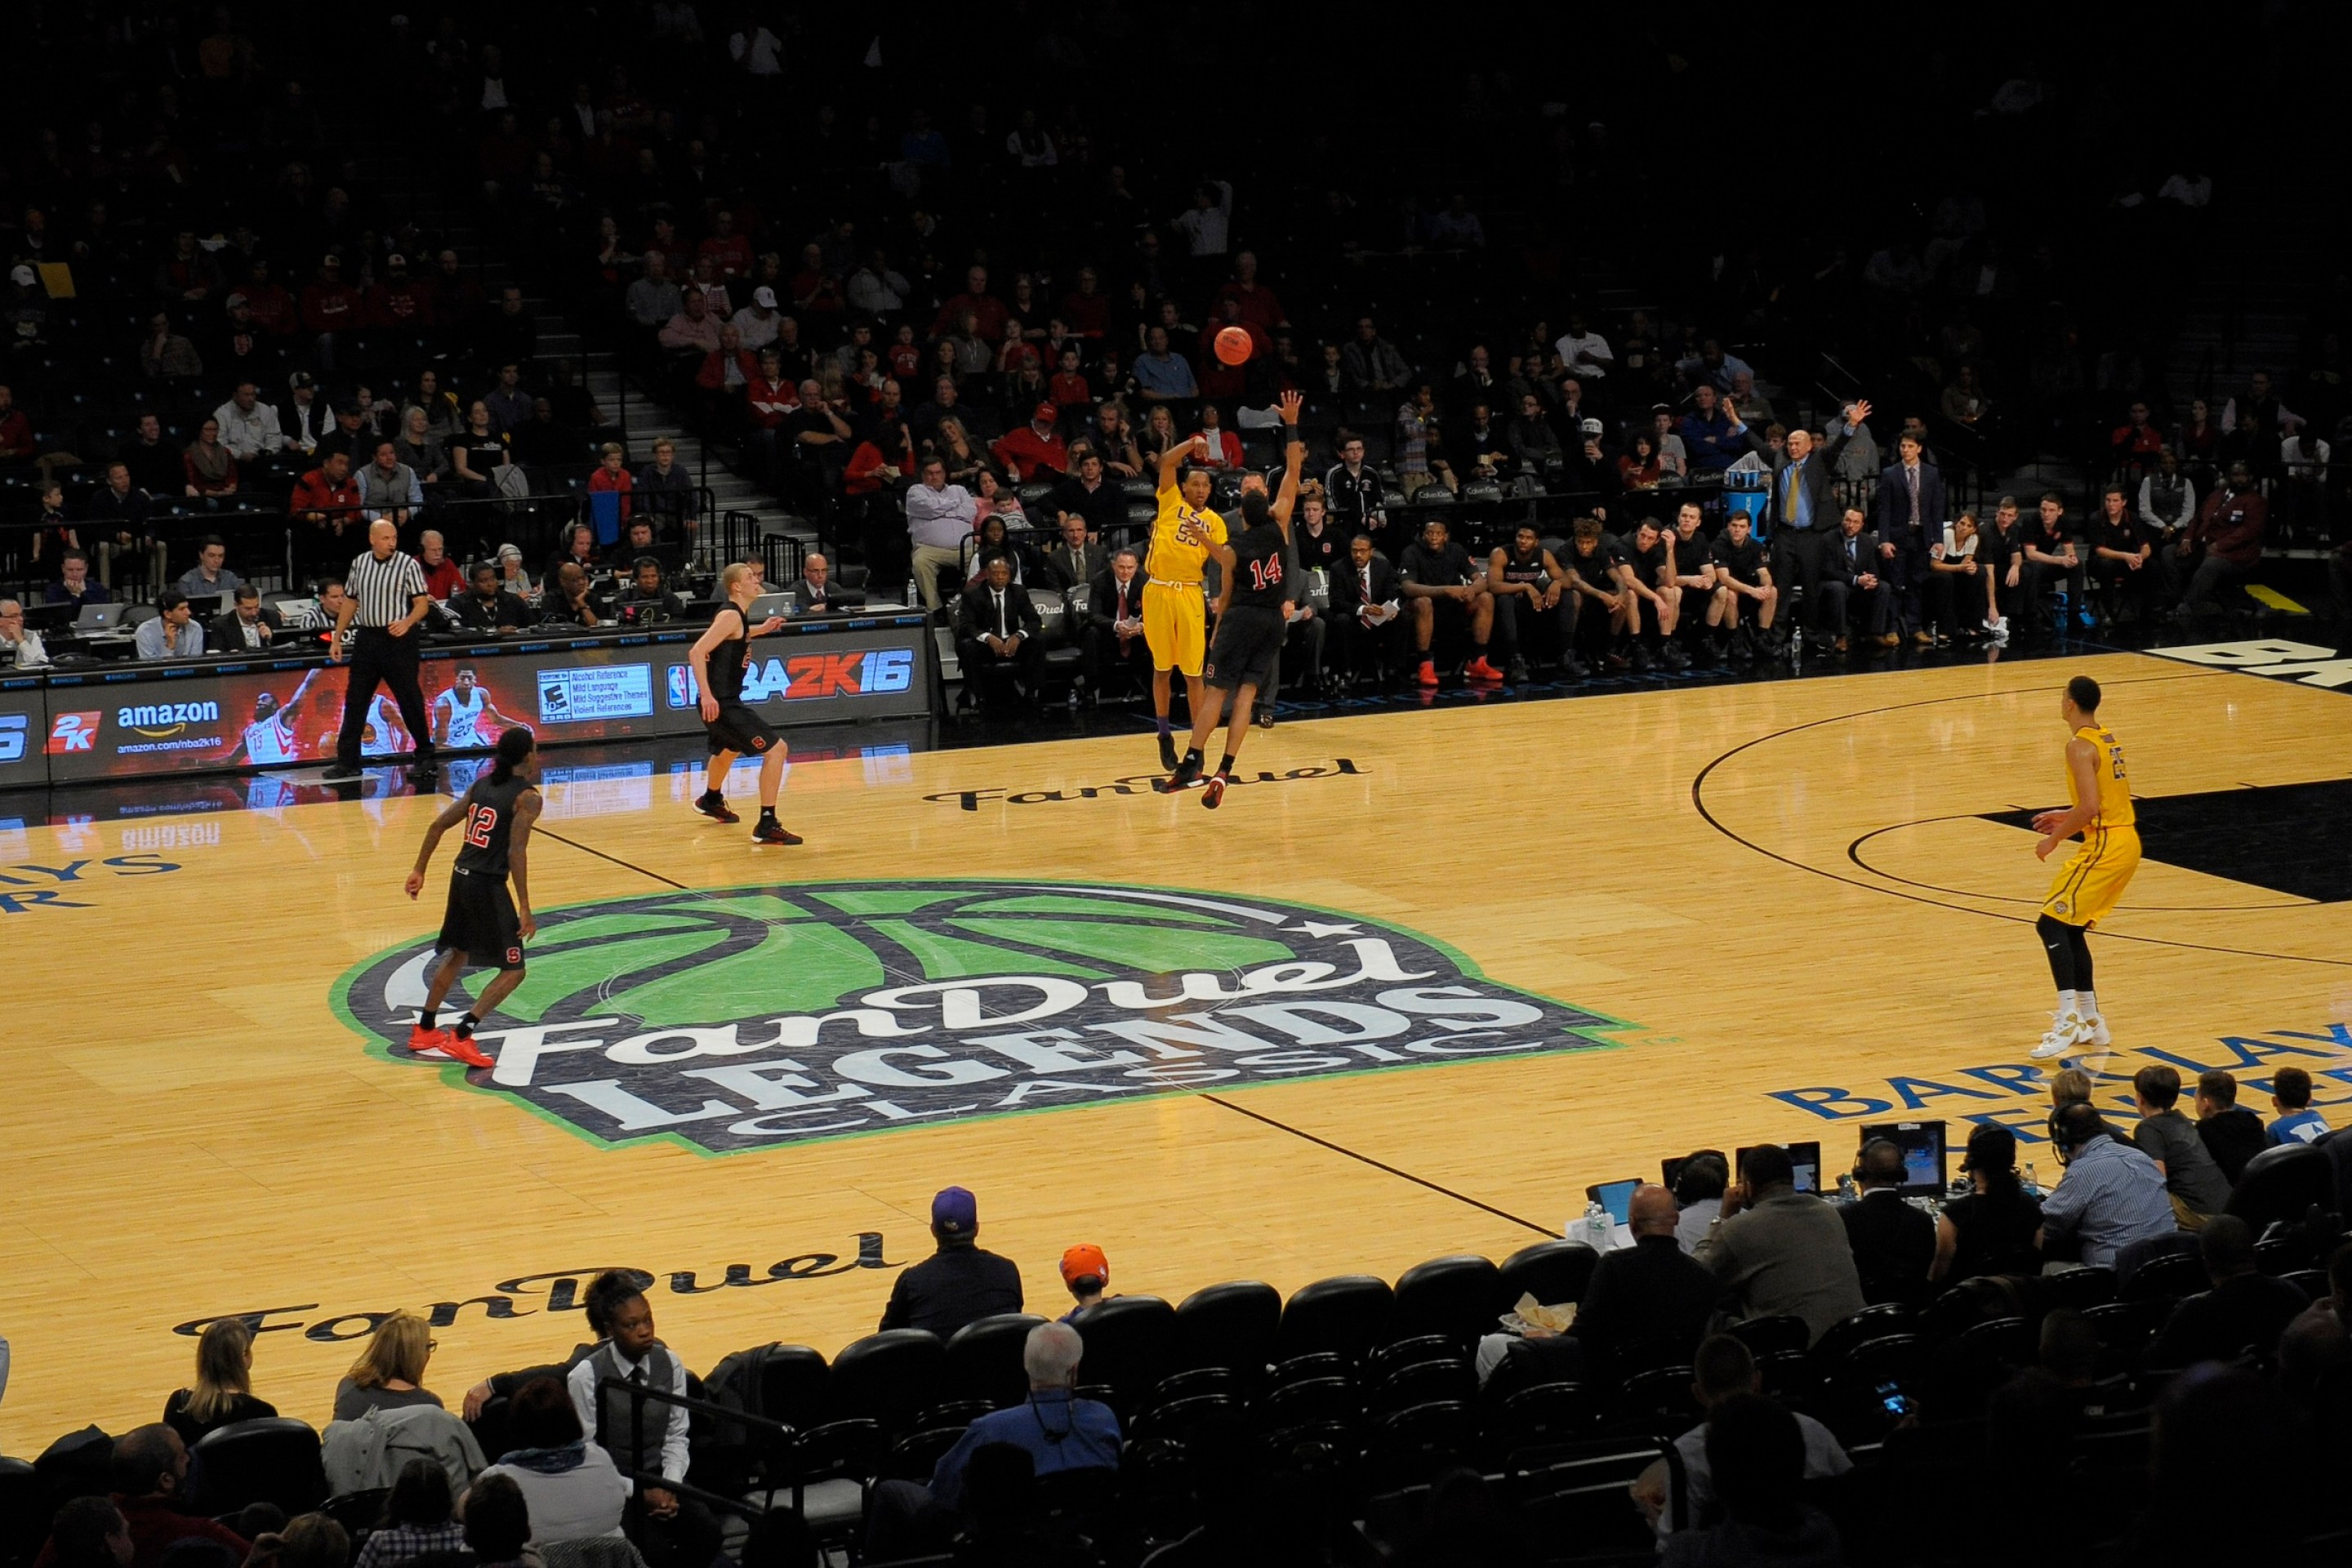 NEW YORK, NY - NOVEMBER 24: Overall view of the FanDuel logo at the Legends Classic, played between the LSU Tigers and the North Carolina State Wolfpack at the Barclays Center on November 24, 2015 in the Brooklyn borough of New York City. FanDuel was the primary sponsor of the tournament. (Photo by Porter Binks/Getty Images)